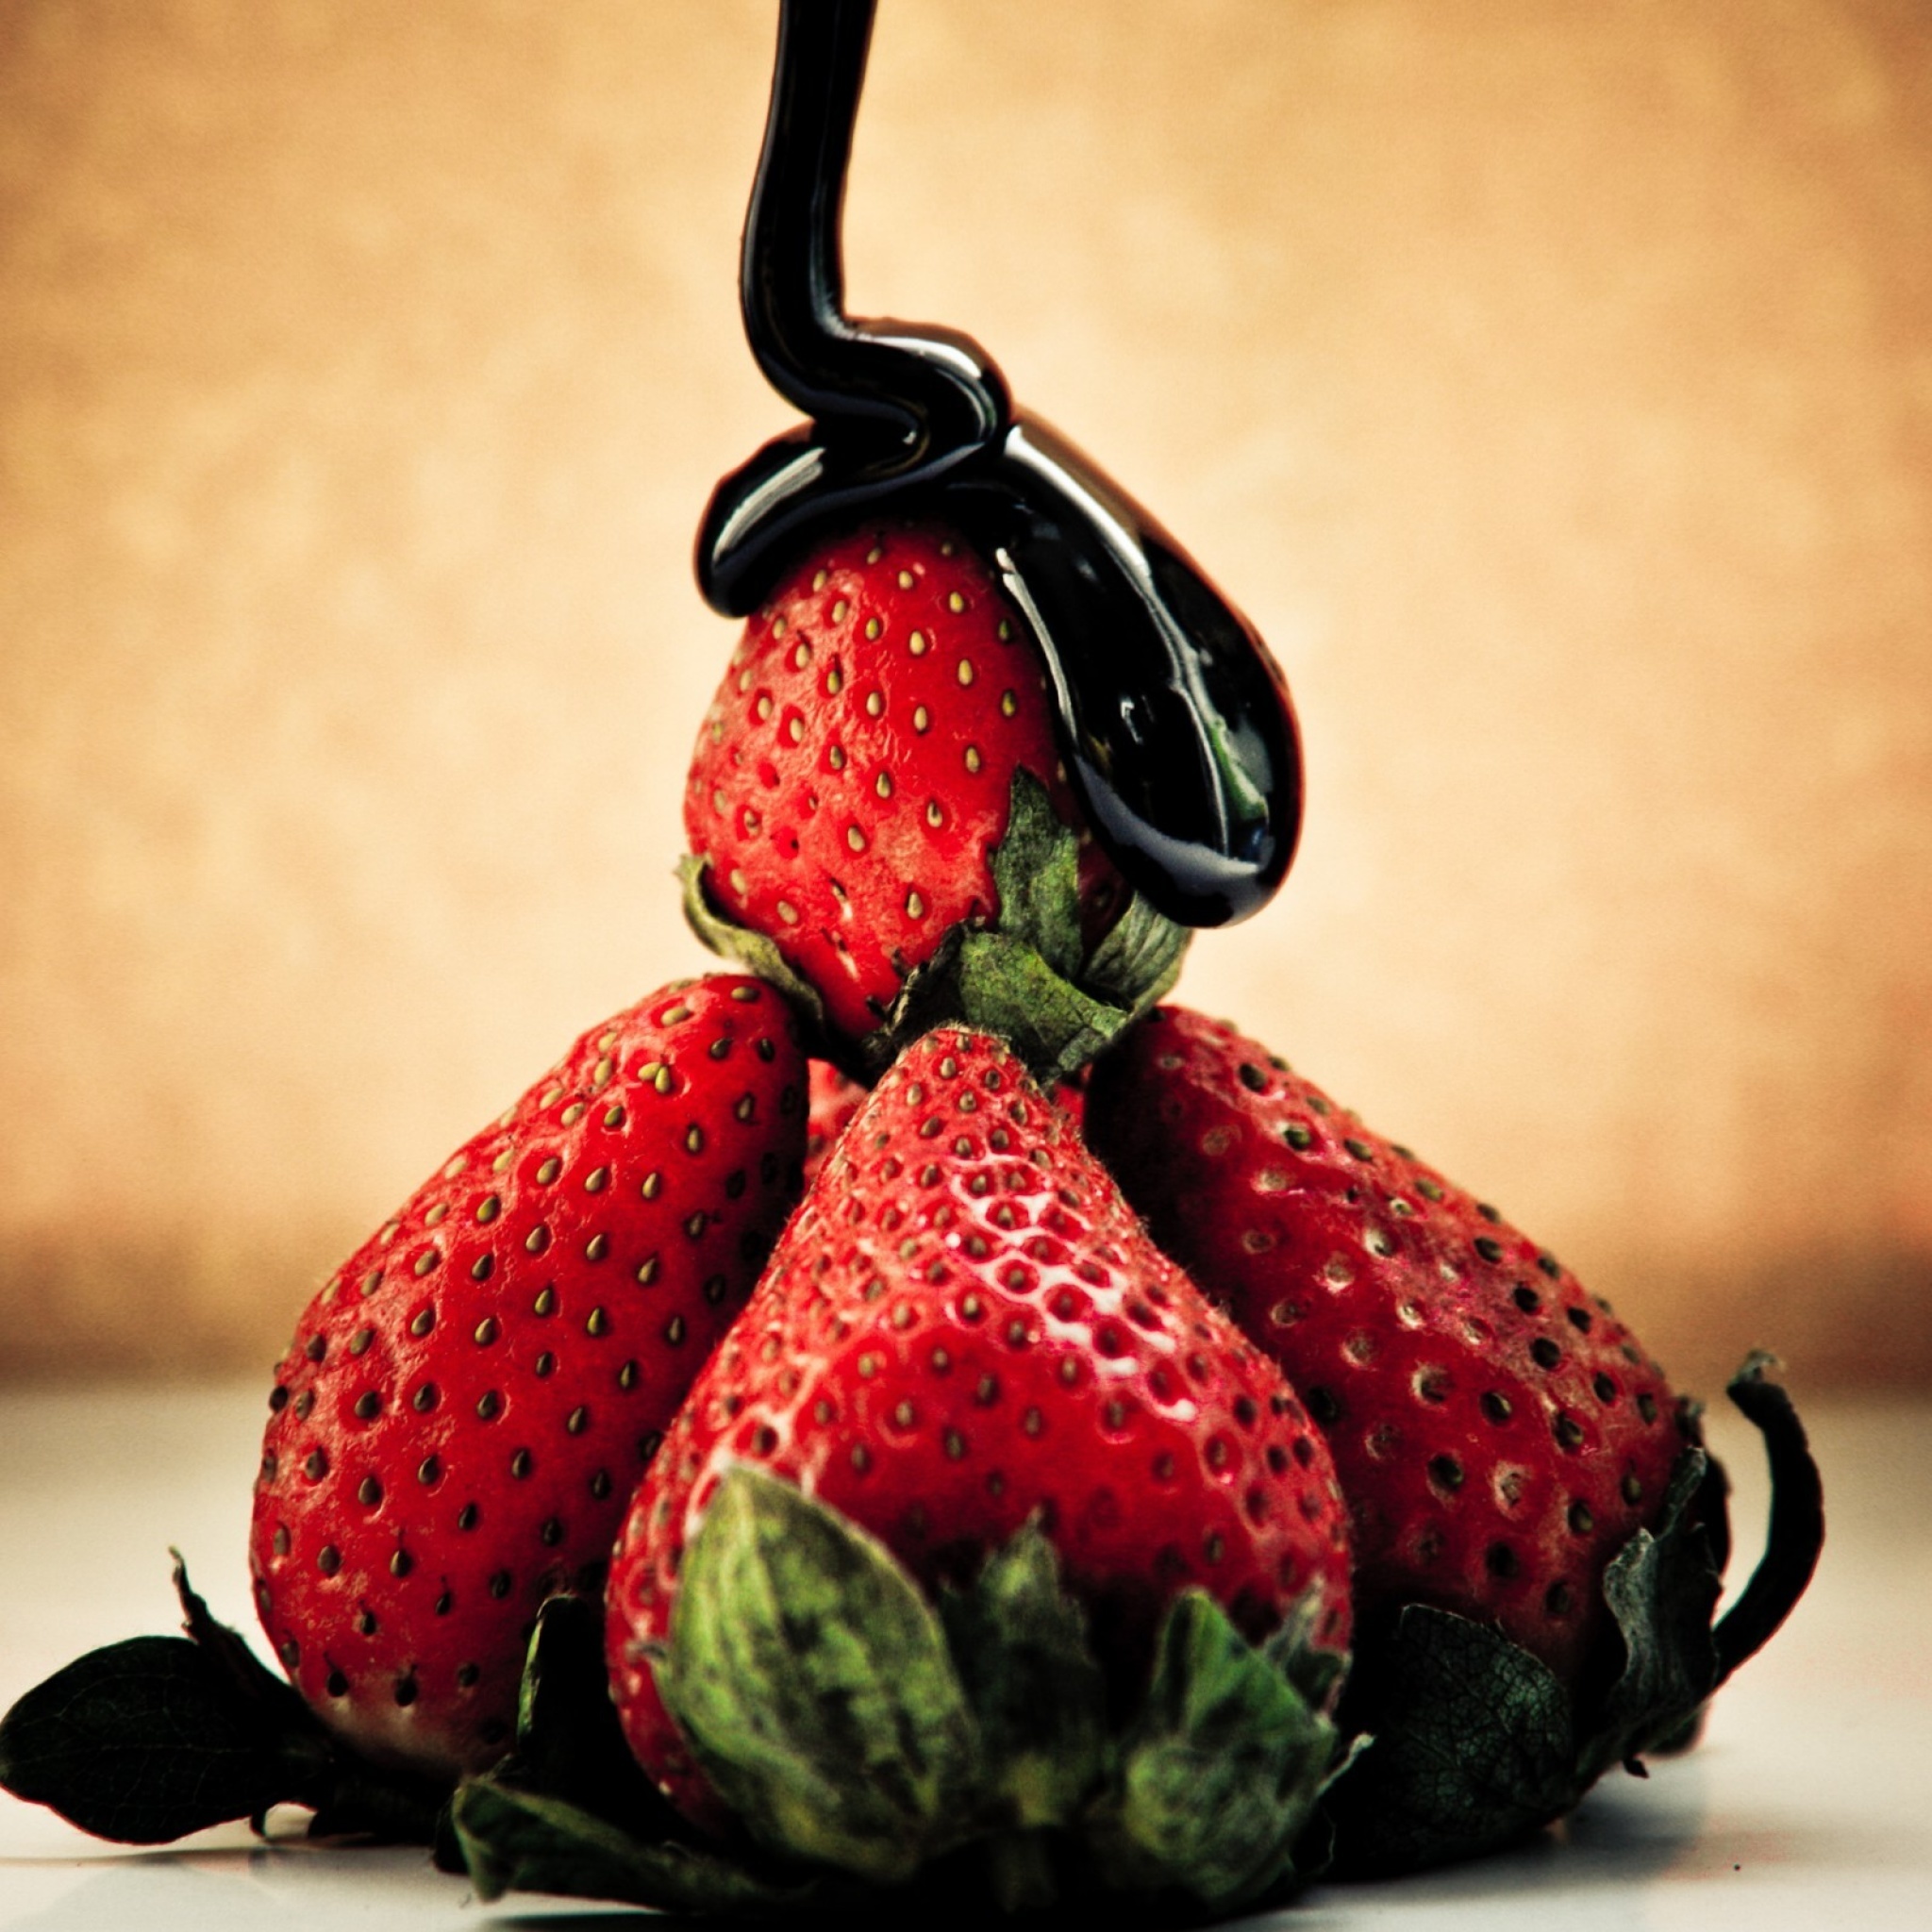 Strawberries with chocolate wallpaper 2048x2048